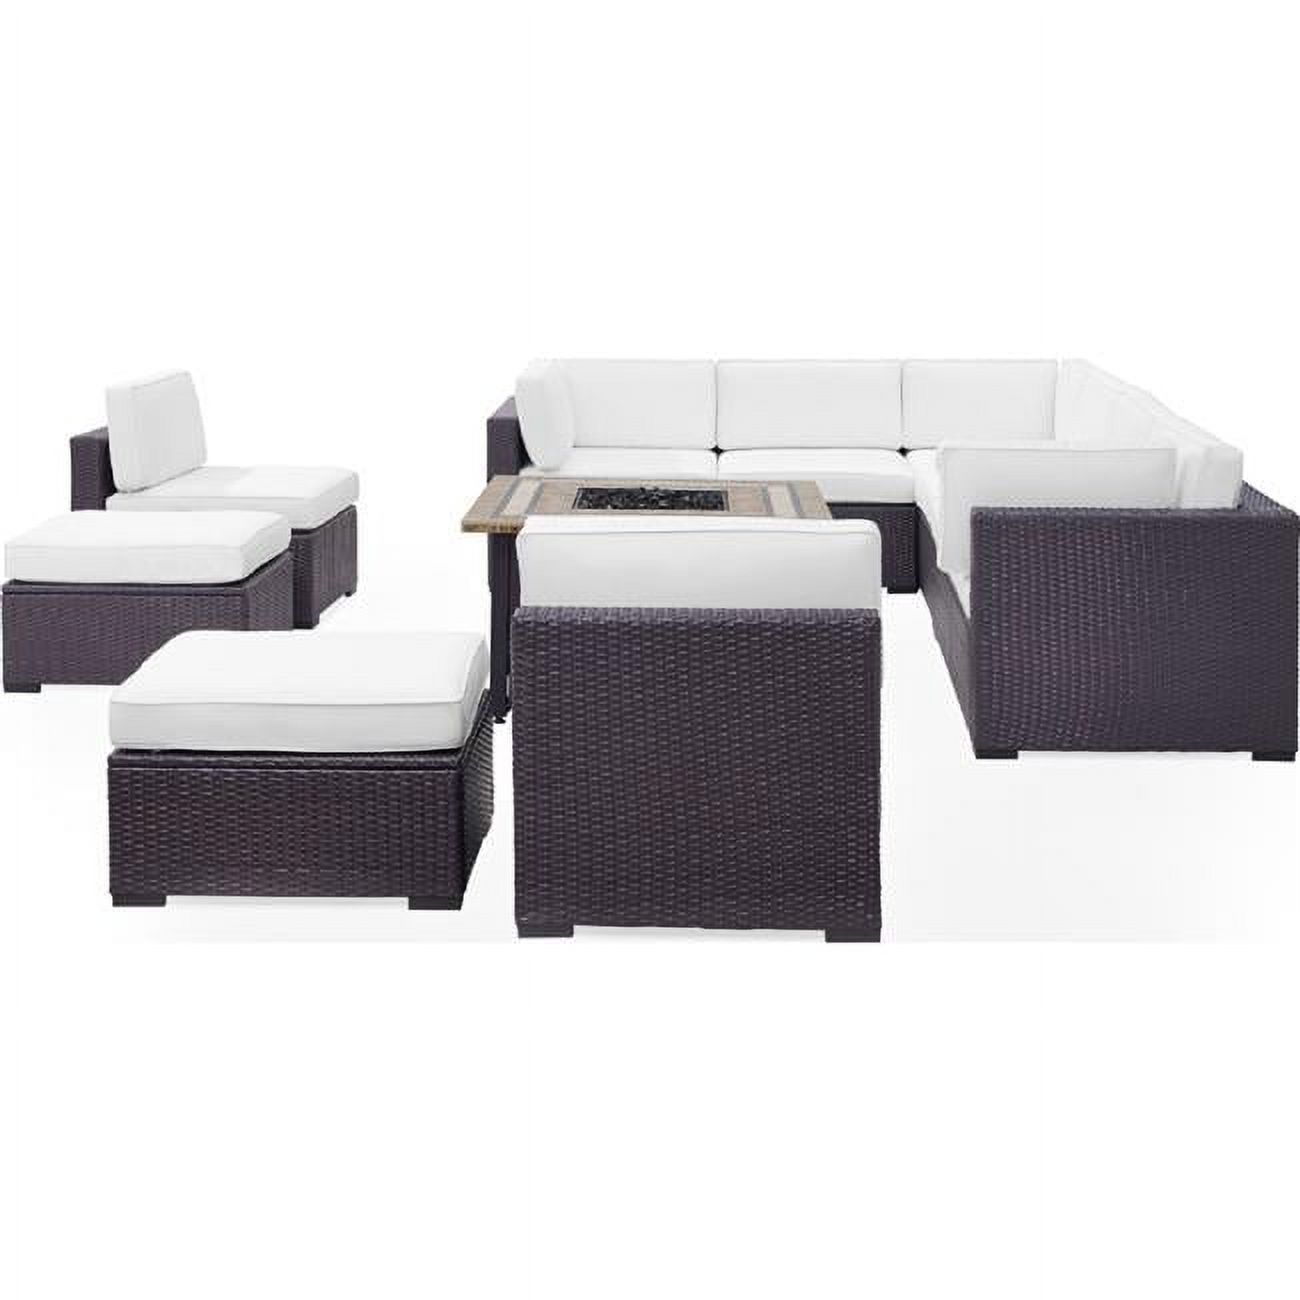 Crosley Furniture Biscayne 8 Piece Fabric Patio Fire Pit Sectional Set in White - image 1 of 4